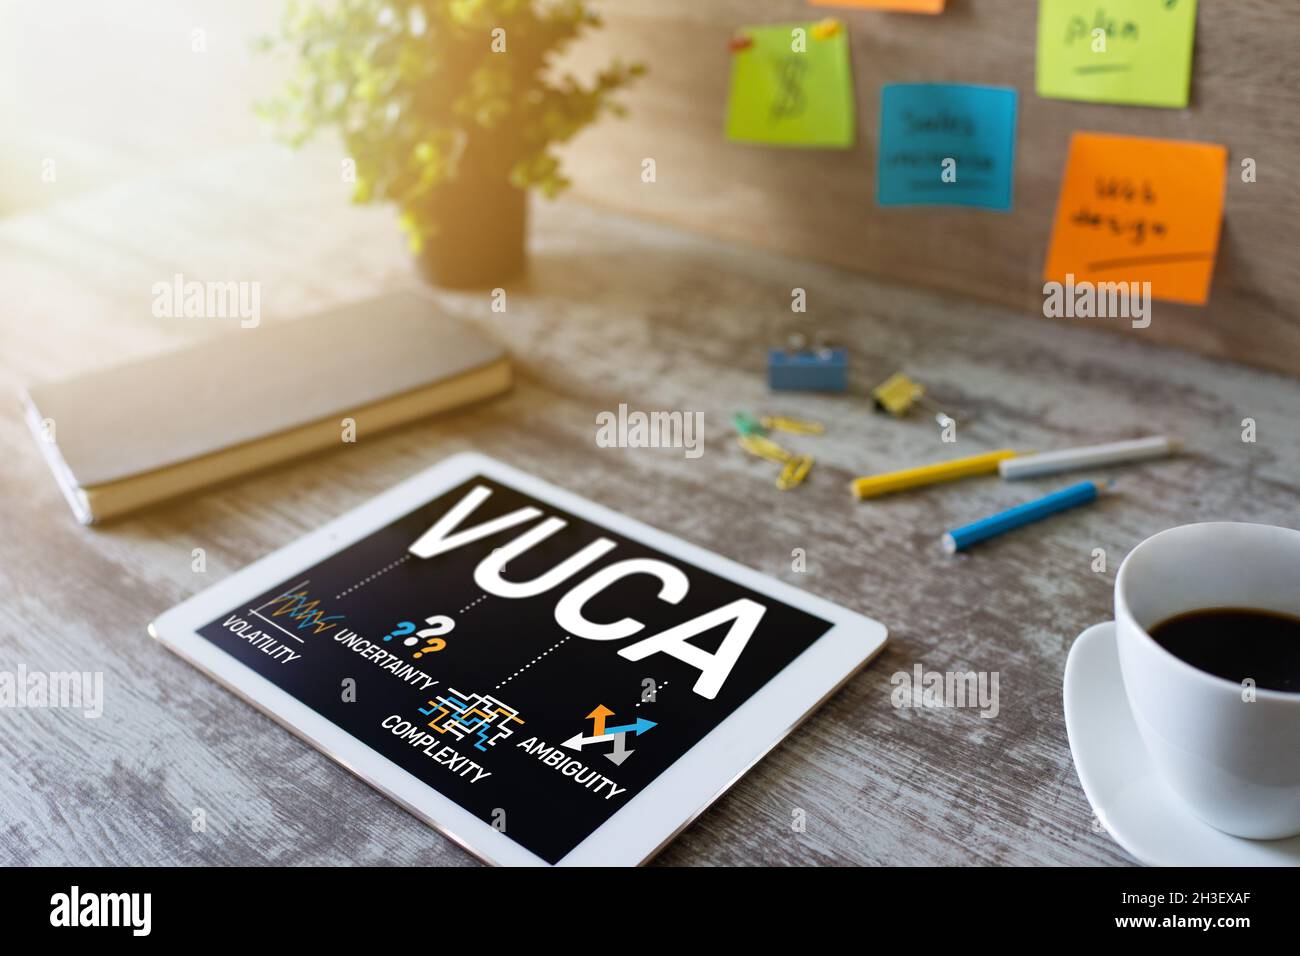 VUCA world concept on screen. Volatility, uncertainty, complexity, ambiguity. Stock Photo